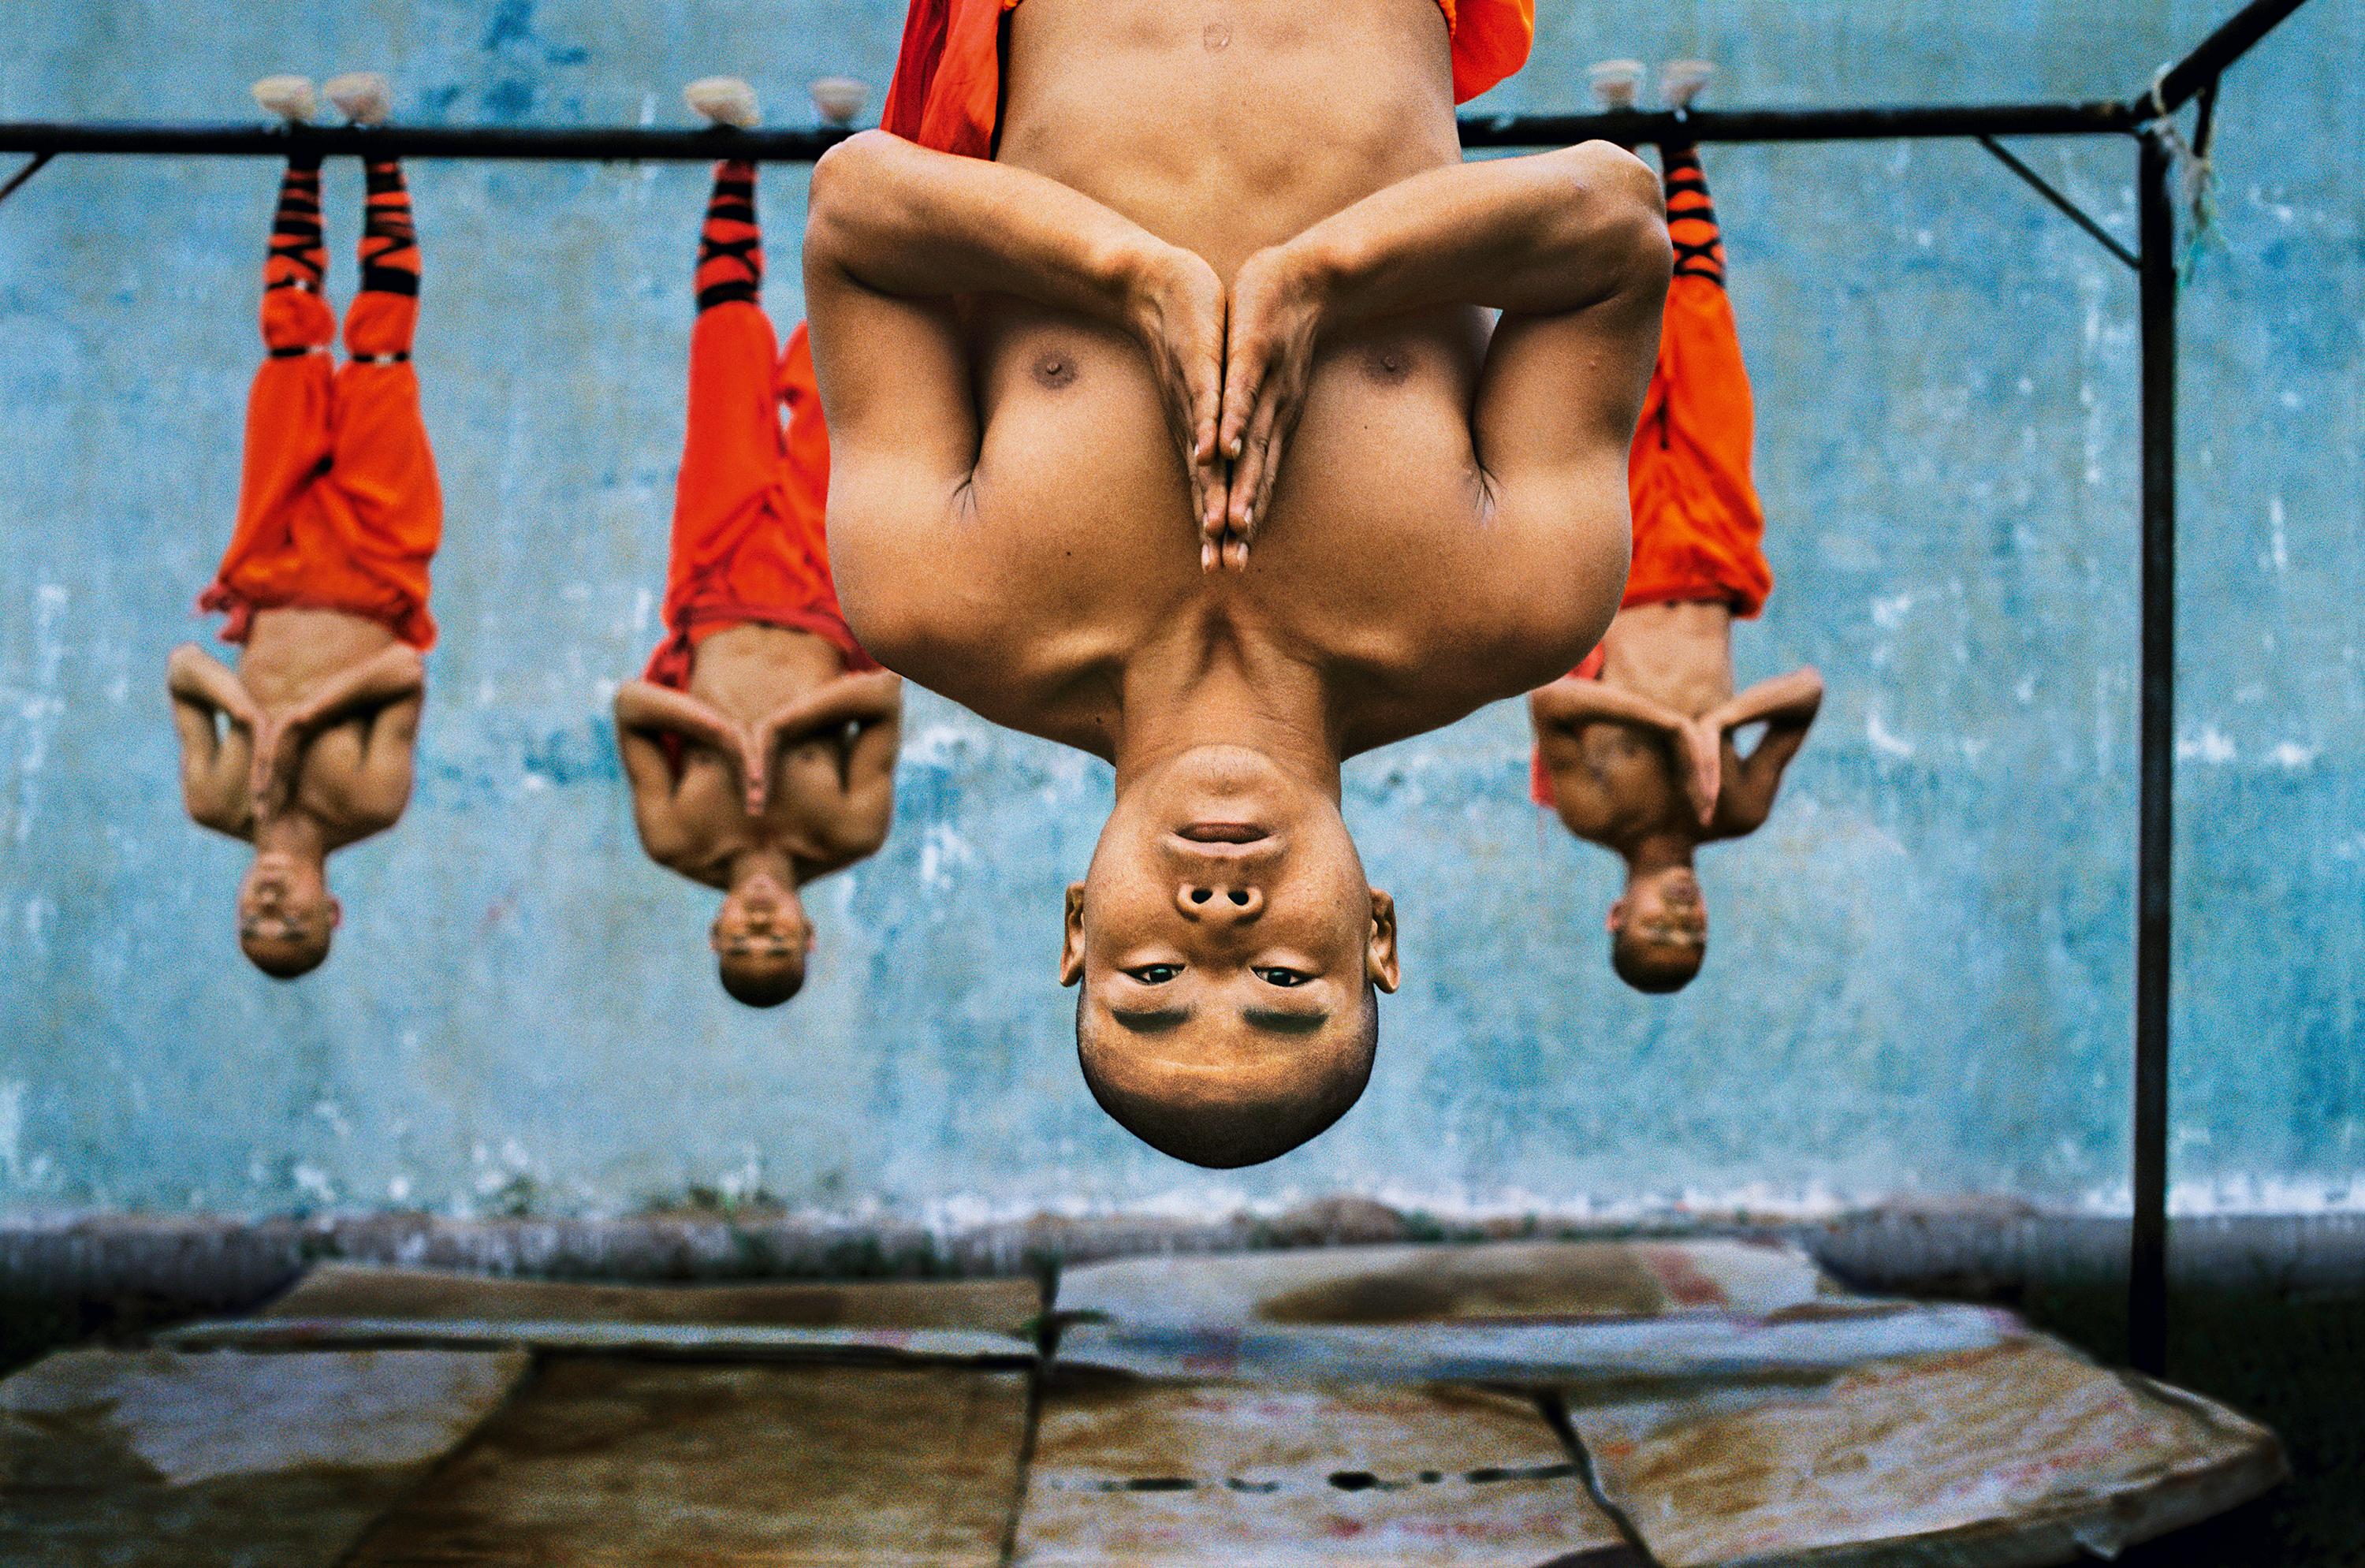 Shaolin Monks Training, Zhengzhou, China, 2004 - Steve McCurry 
Signed, affixed with artist's edition label and numbered on reverse
Digital c-type print

20 x 24 inches, edition of 30
30 x 40 inches, edition of 15 
40 x 60 inches, edition of 10 
48